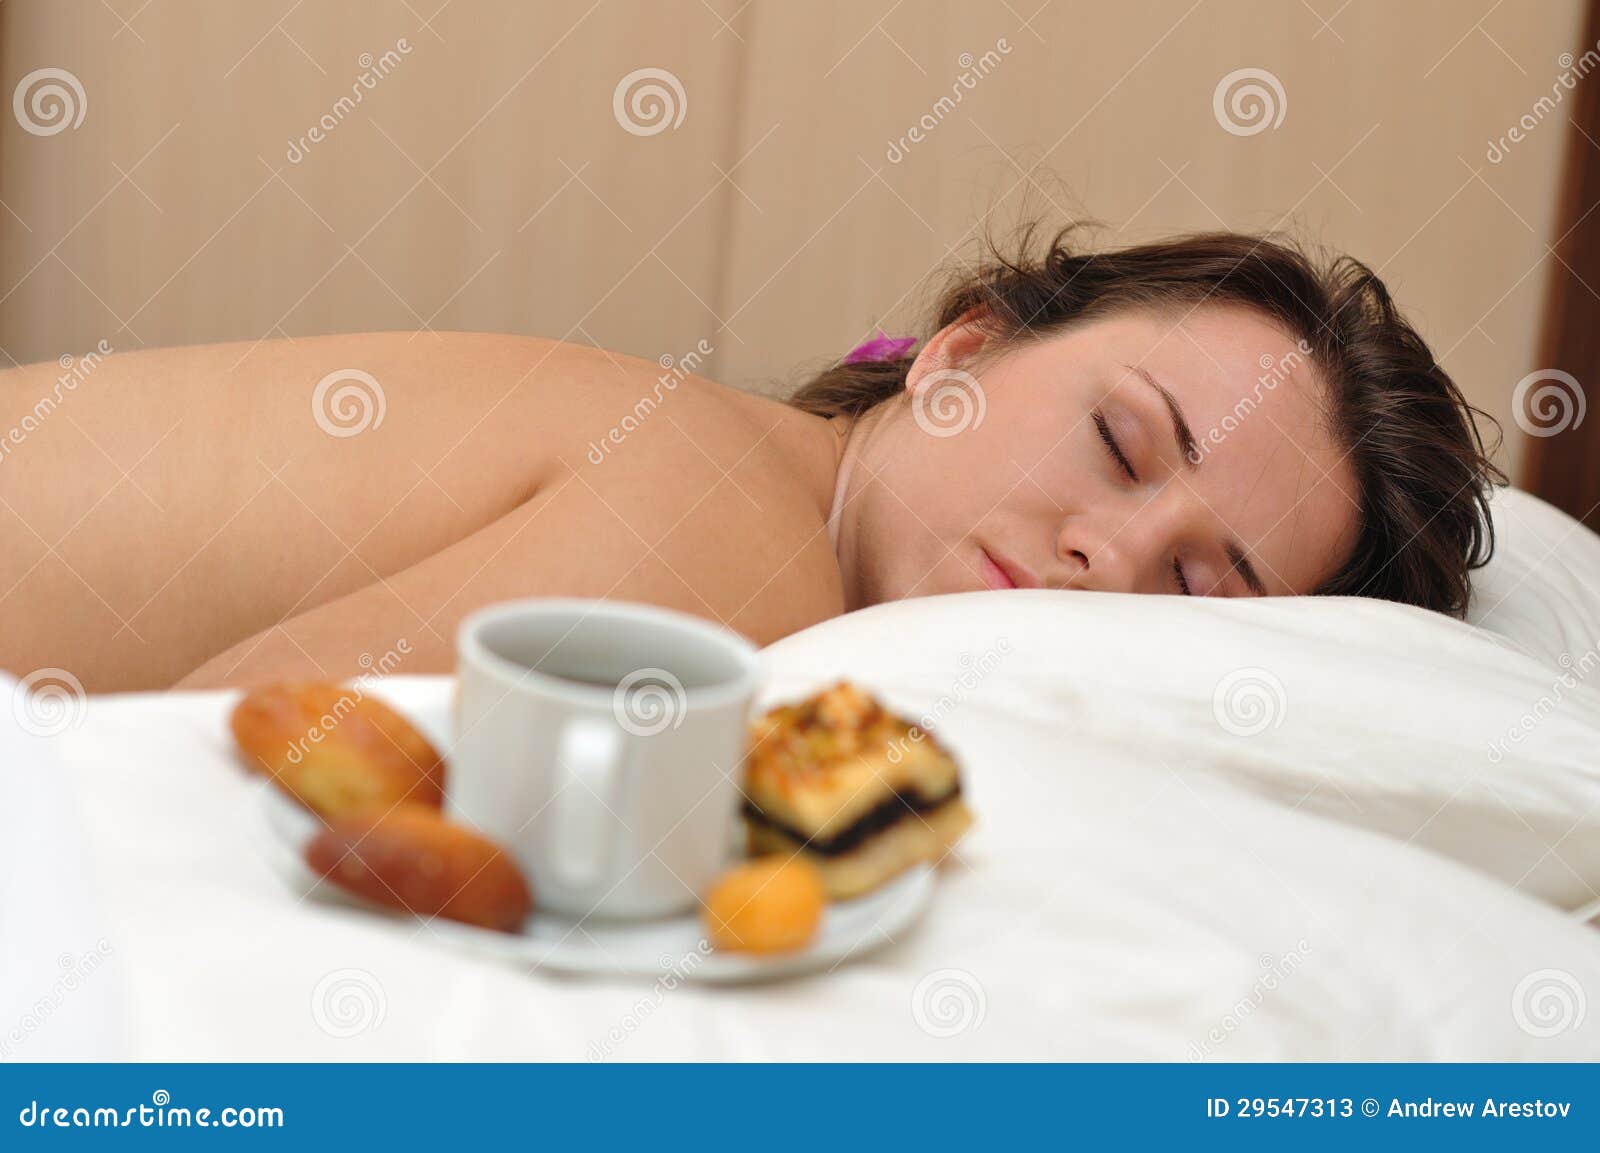 Morning coffee in a bed. The girl sleeps near morning coffee